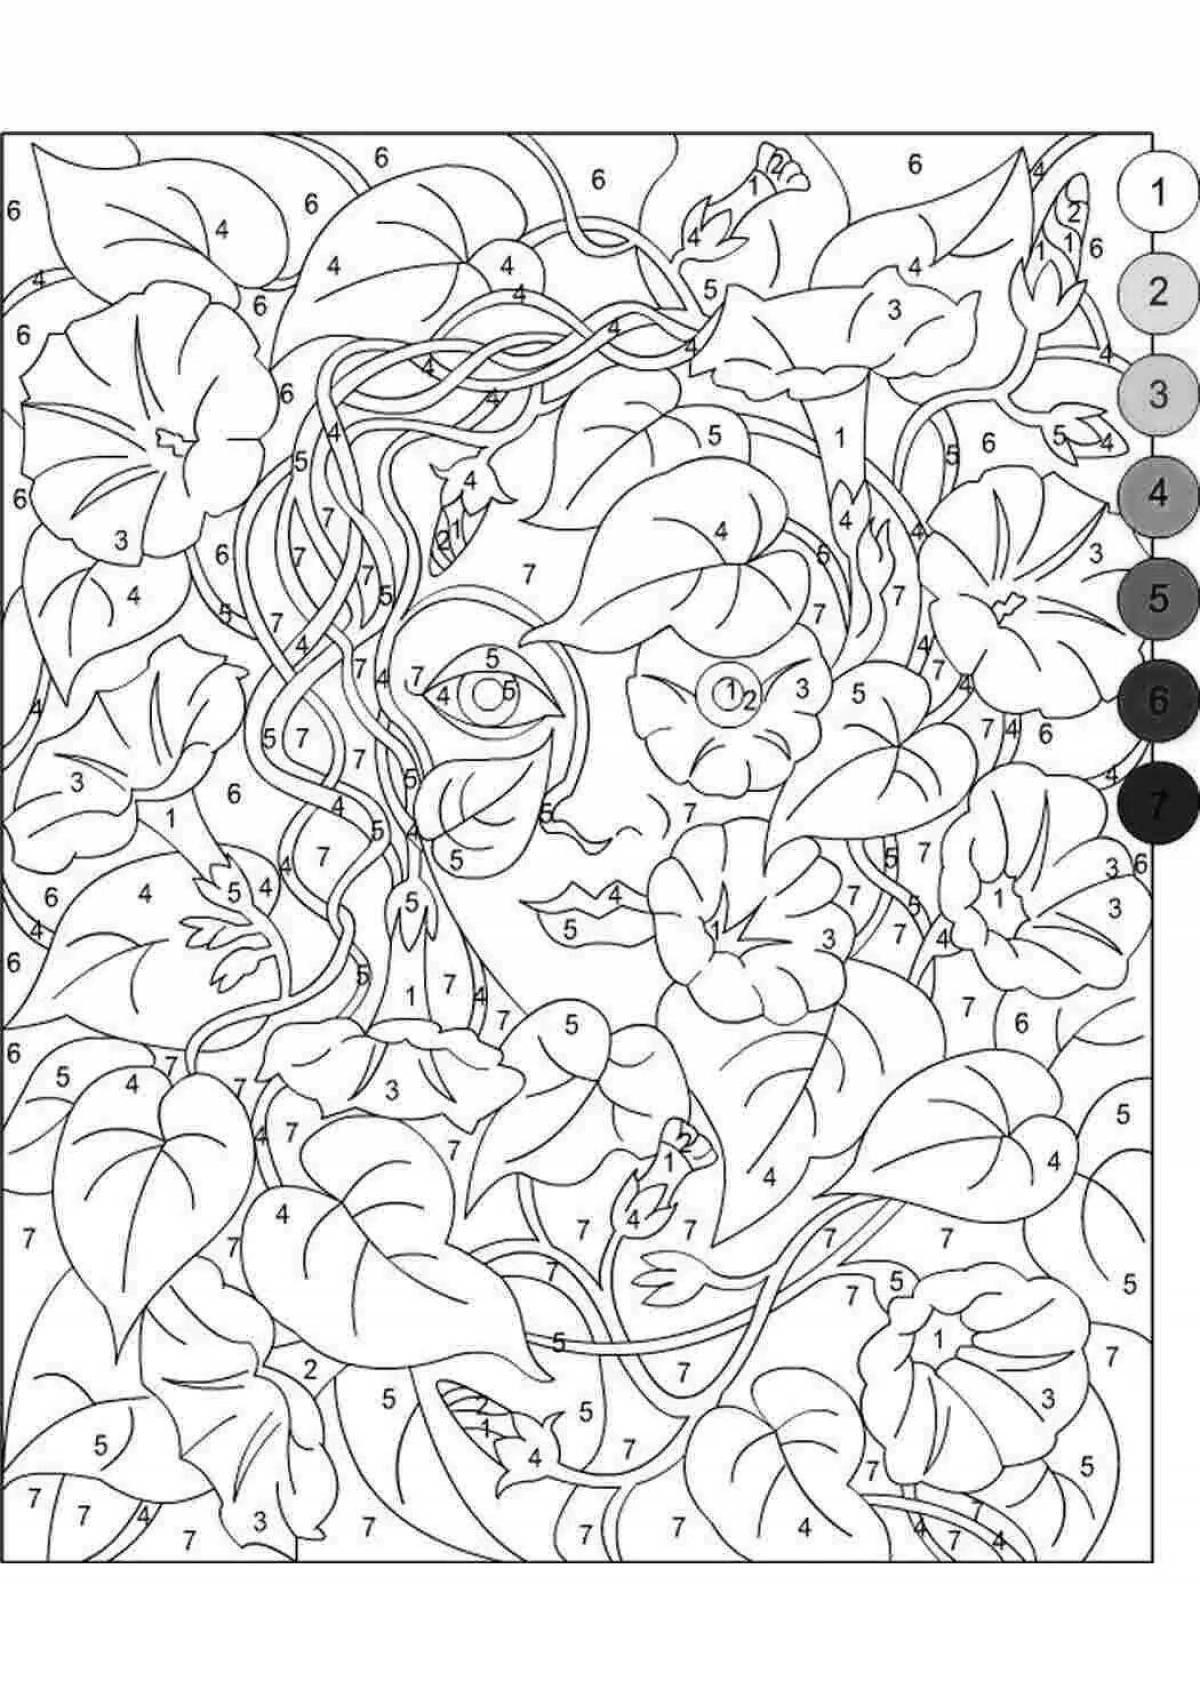 Awesome complex coloring book